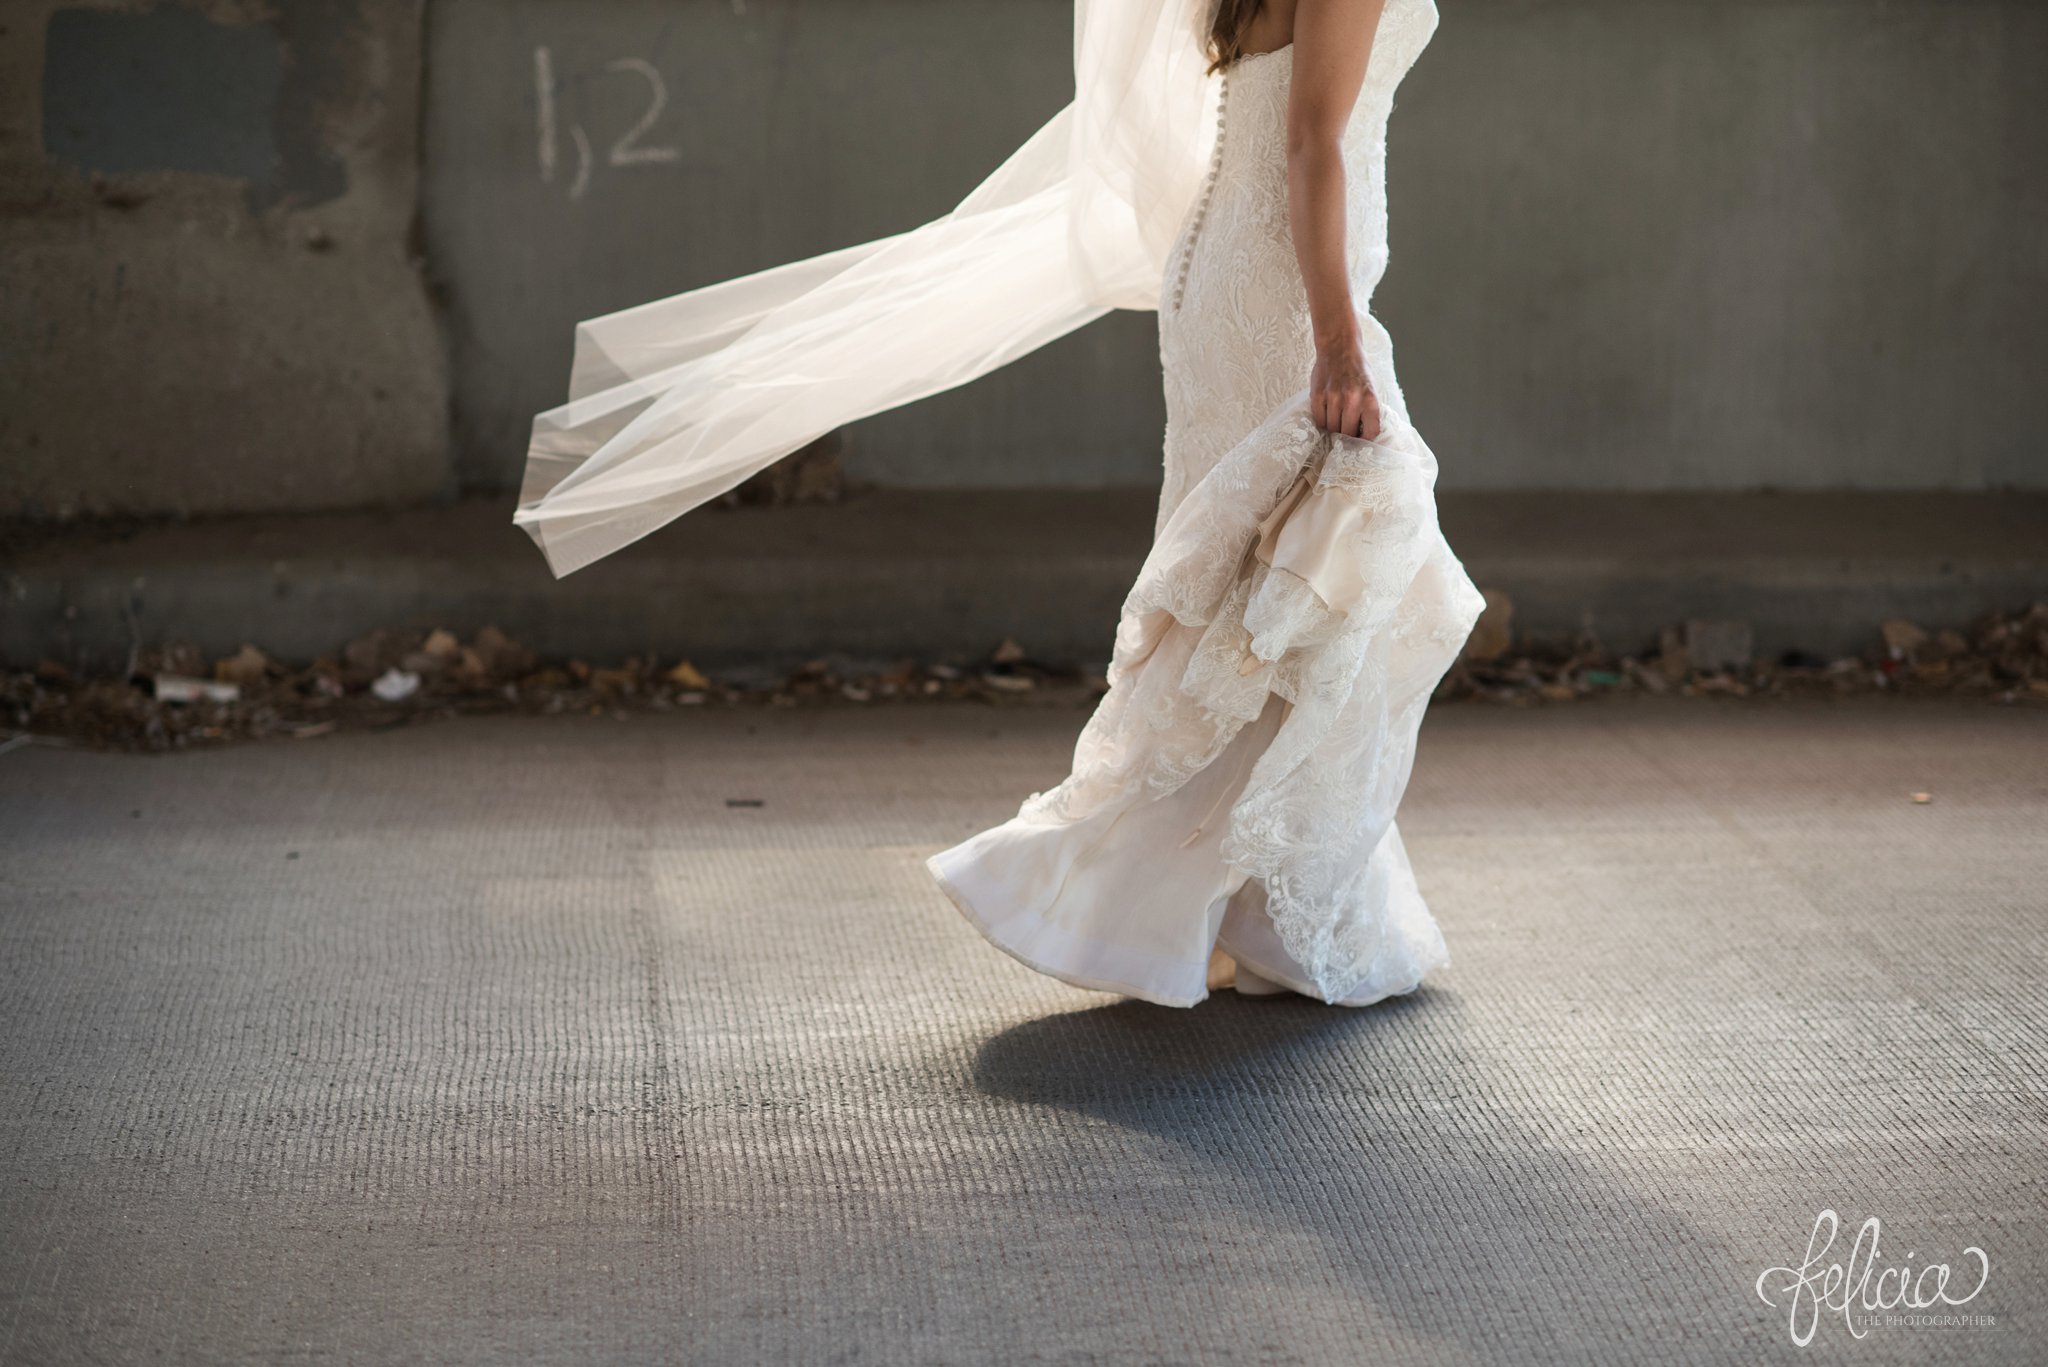 wedding | wedding photos | industrial | Rumely Event Space | wedding photography | images by feliciathephotographer.com | West Bottoms | first look | Maggie Sottero | wedding dress train | walking bride | walking toward groom | industrial background